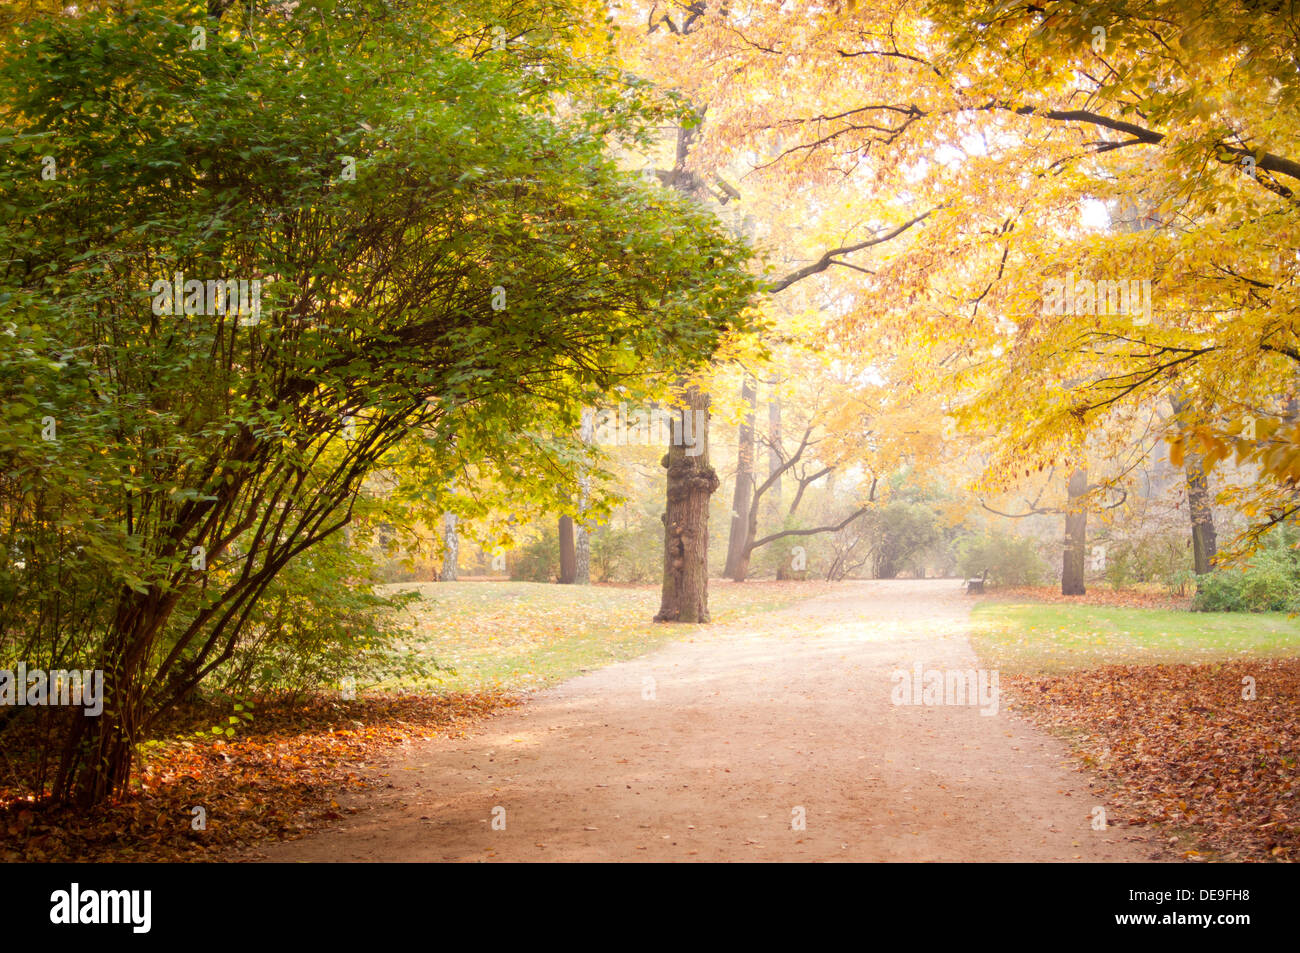 Yellow and green autumn leaves in park alley Stock Photo